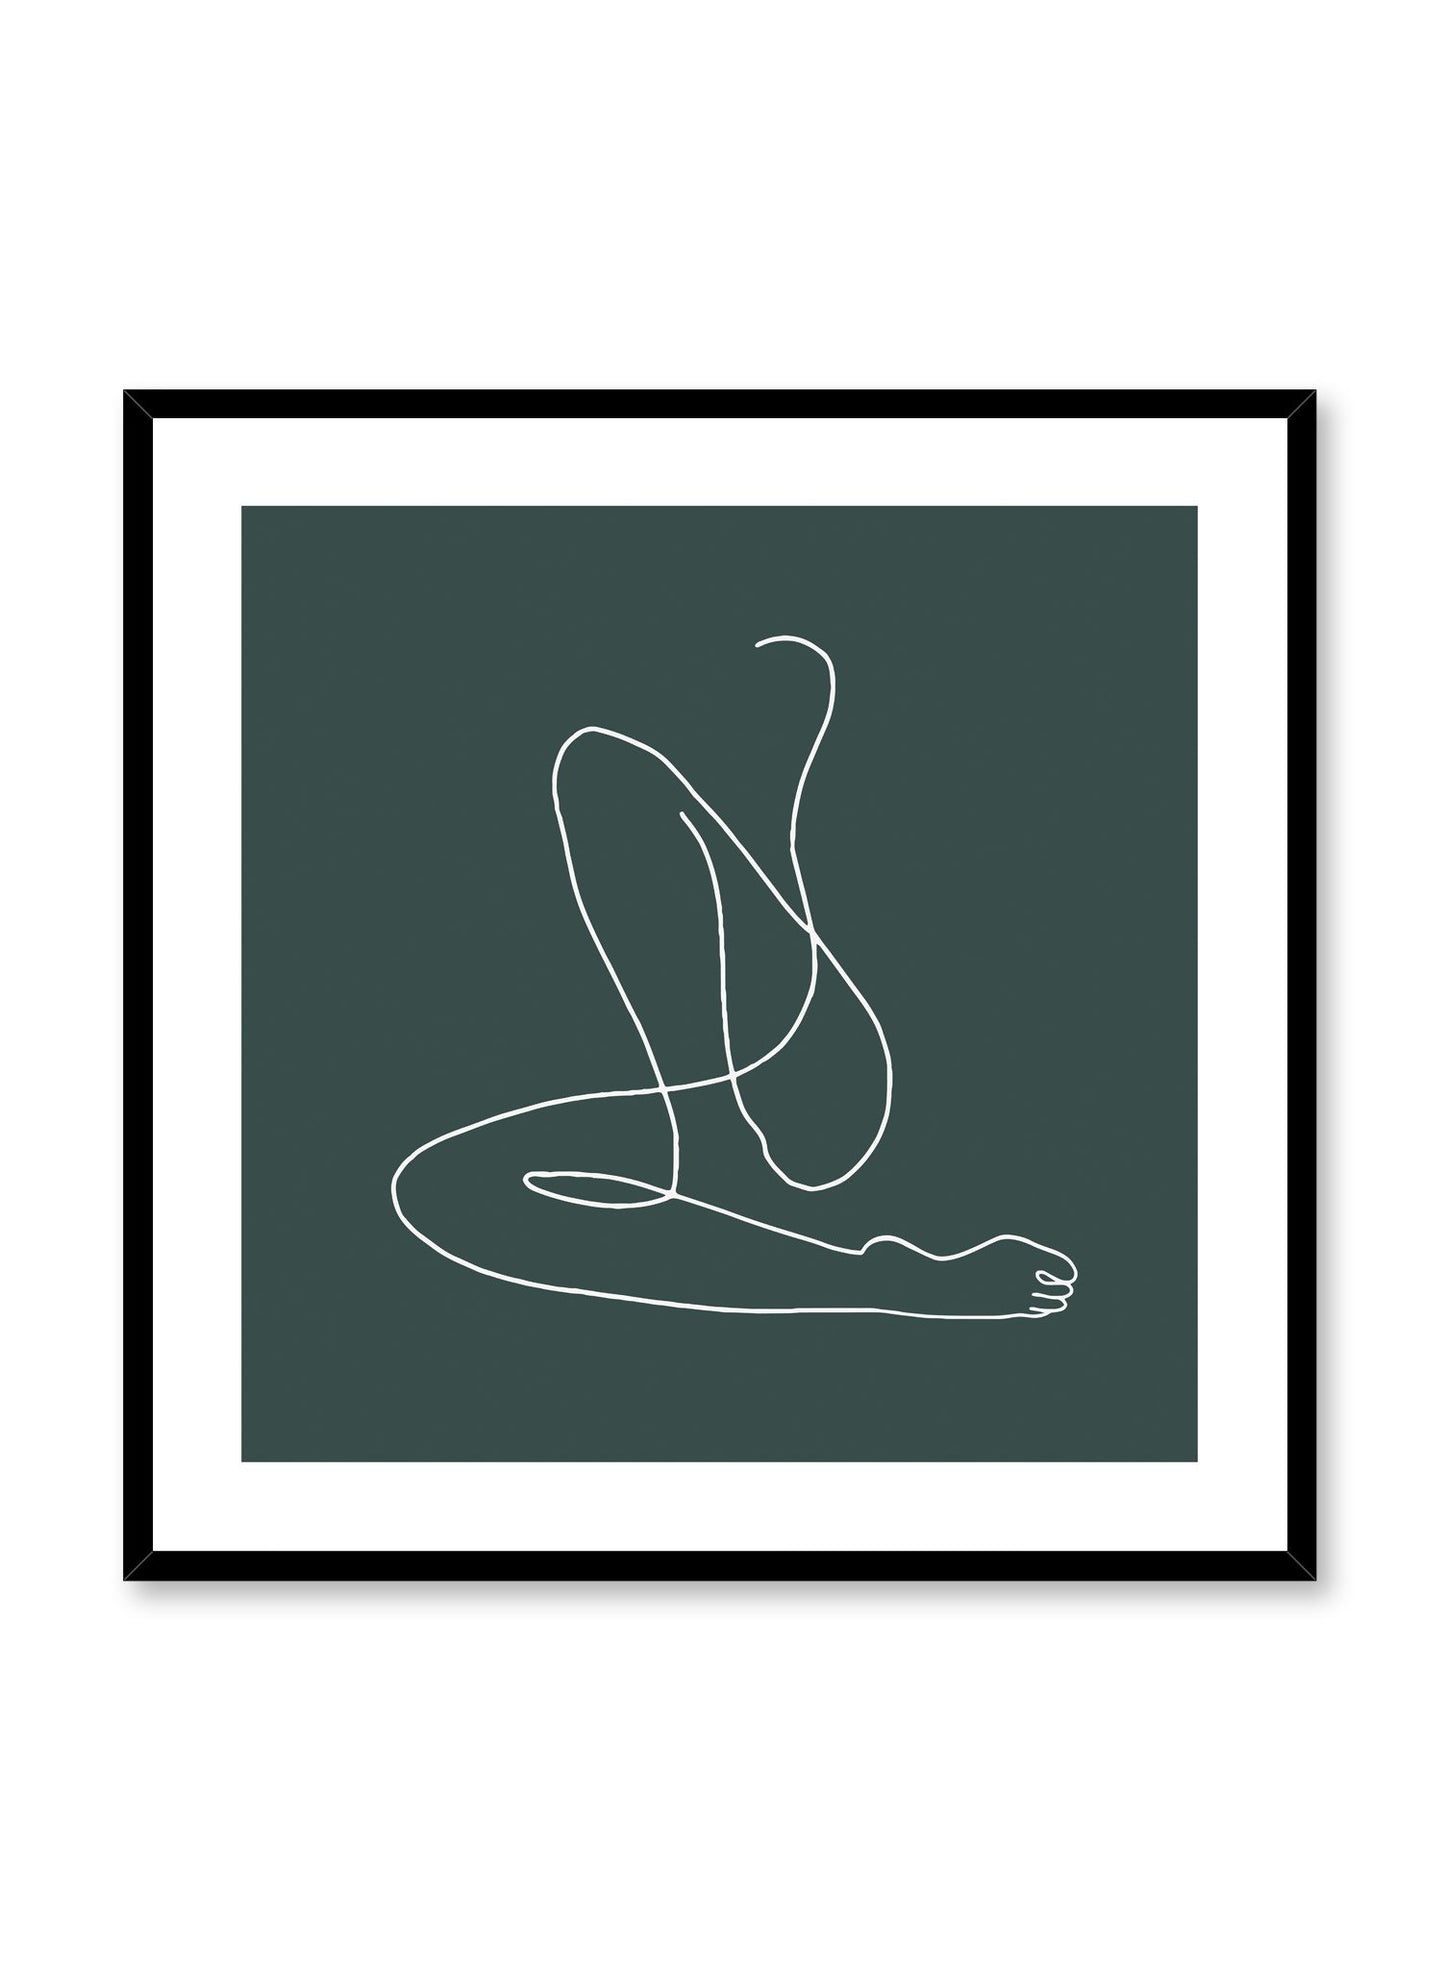 Modern minimalist poster by Opposite Wall with abstract illustration of Flow in green